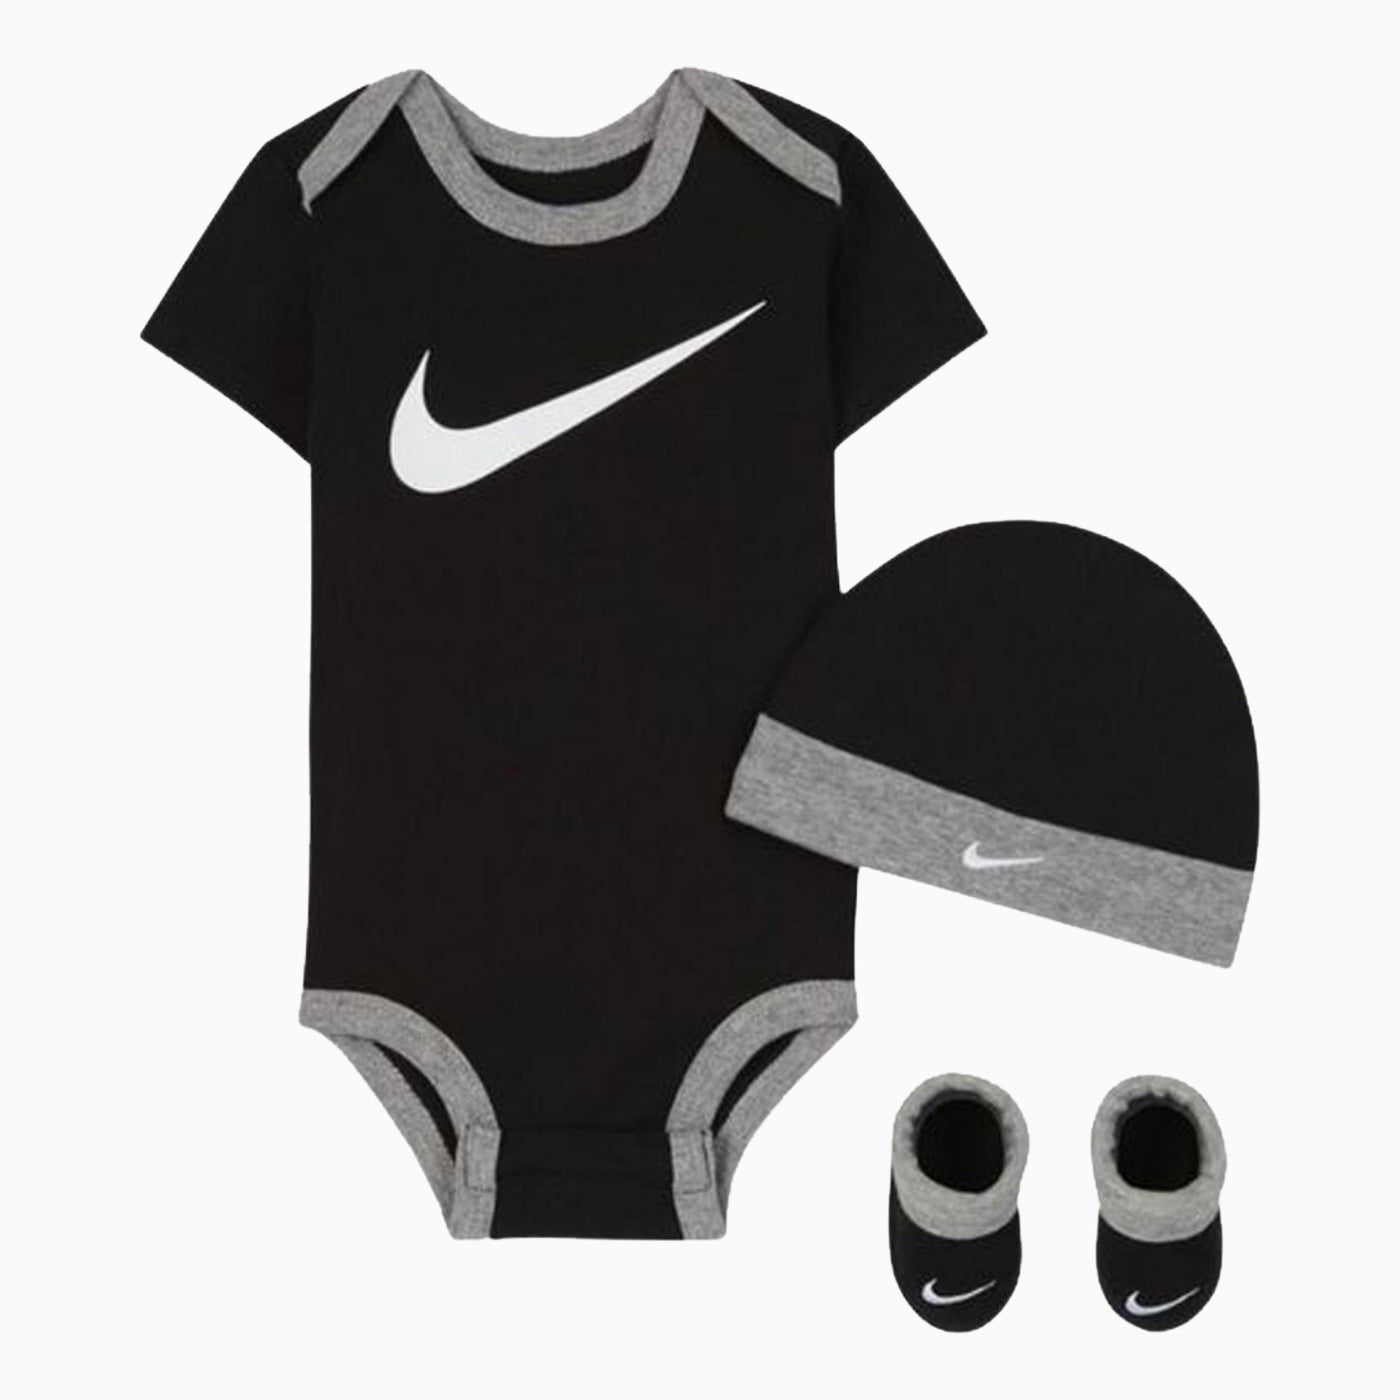 [LN0072-023] Baby Nike Bodysuit, Hat and Booties 3-PC Box Set